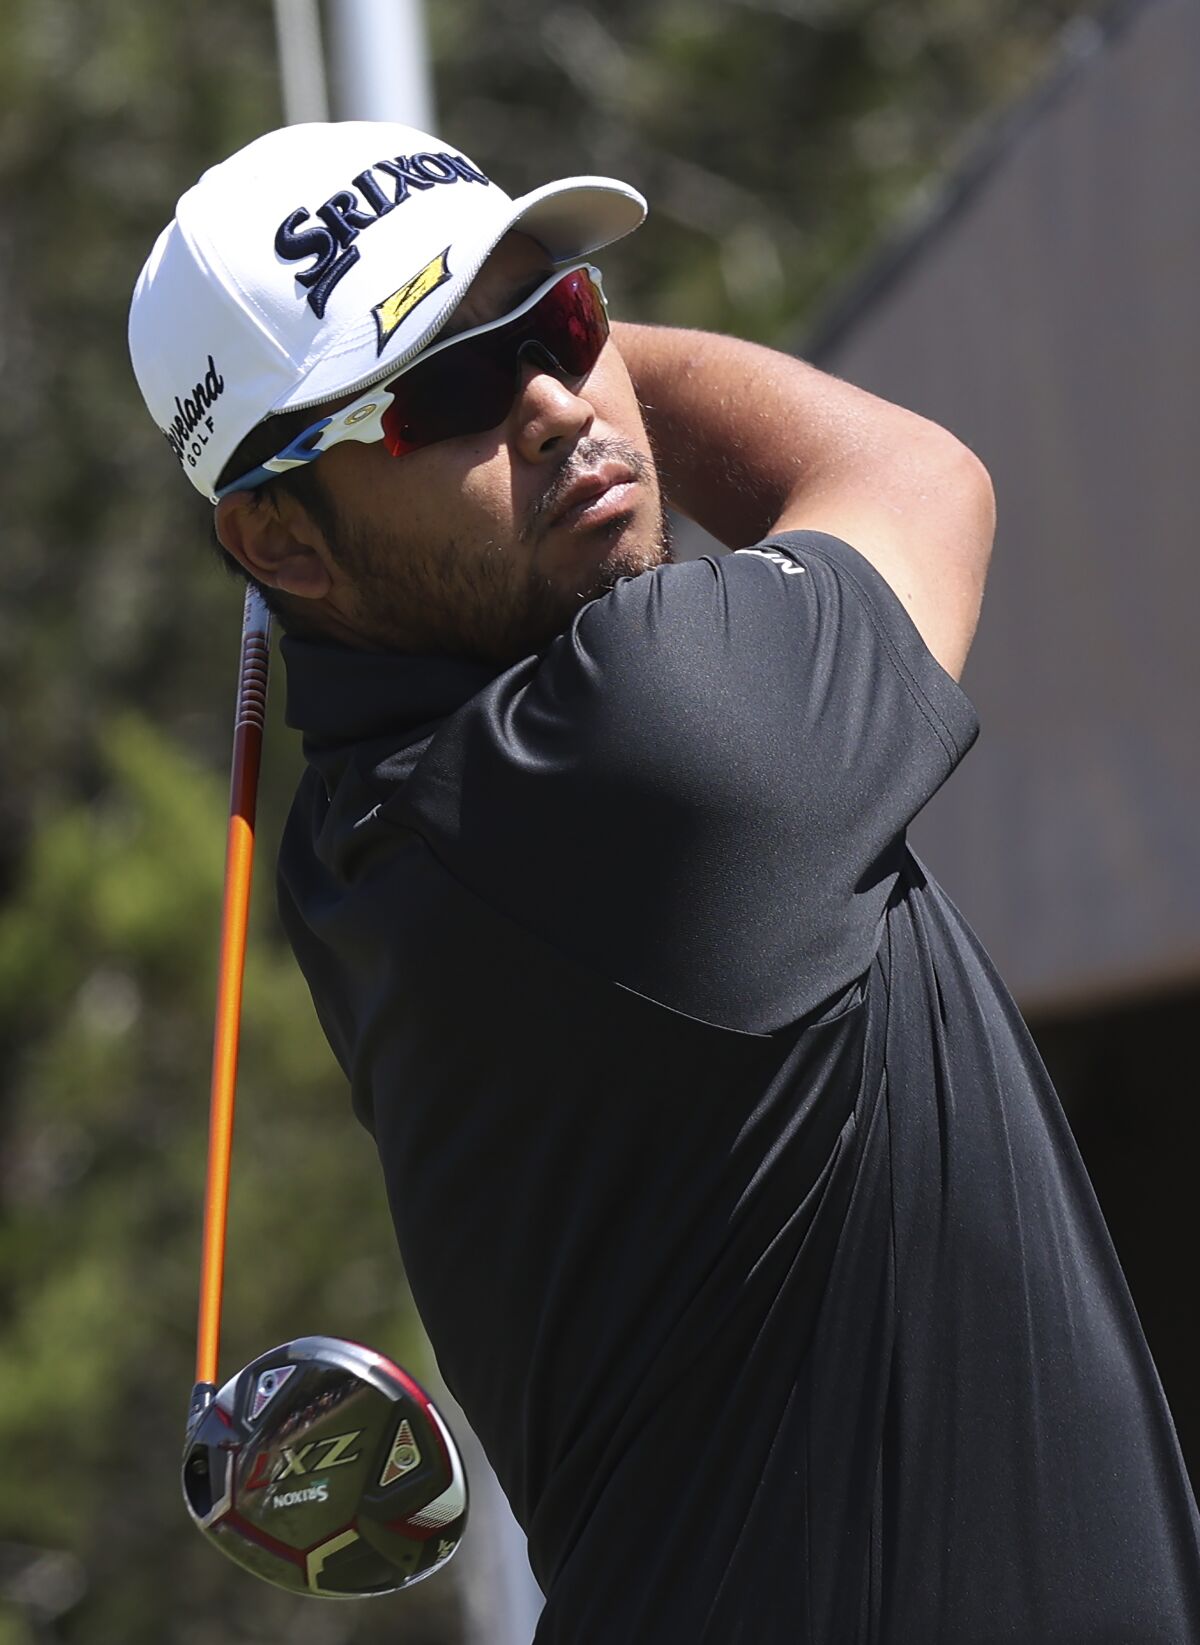 Hideki Matsuyama hits off the first tee on the first day of play at the Valero Texas Open golf tournament in San Antonio, Thursday, March 31, 2022. (Jerry Lara/The San Antonio Express-News via AP)